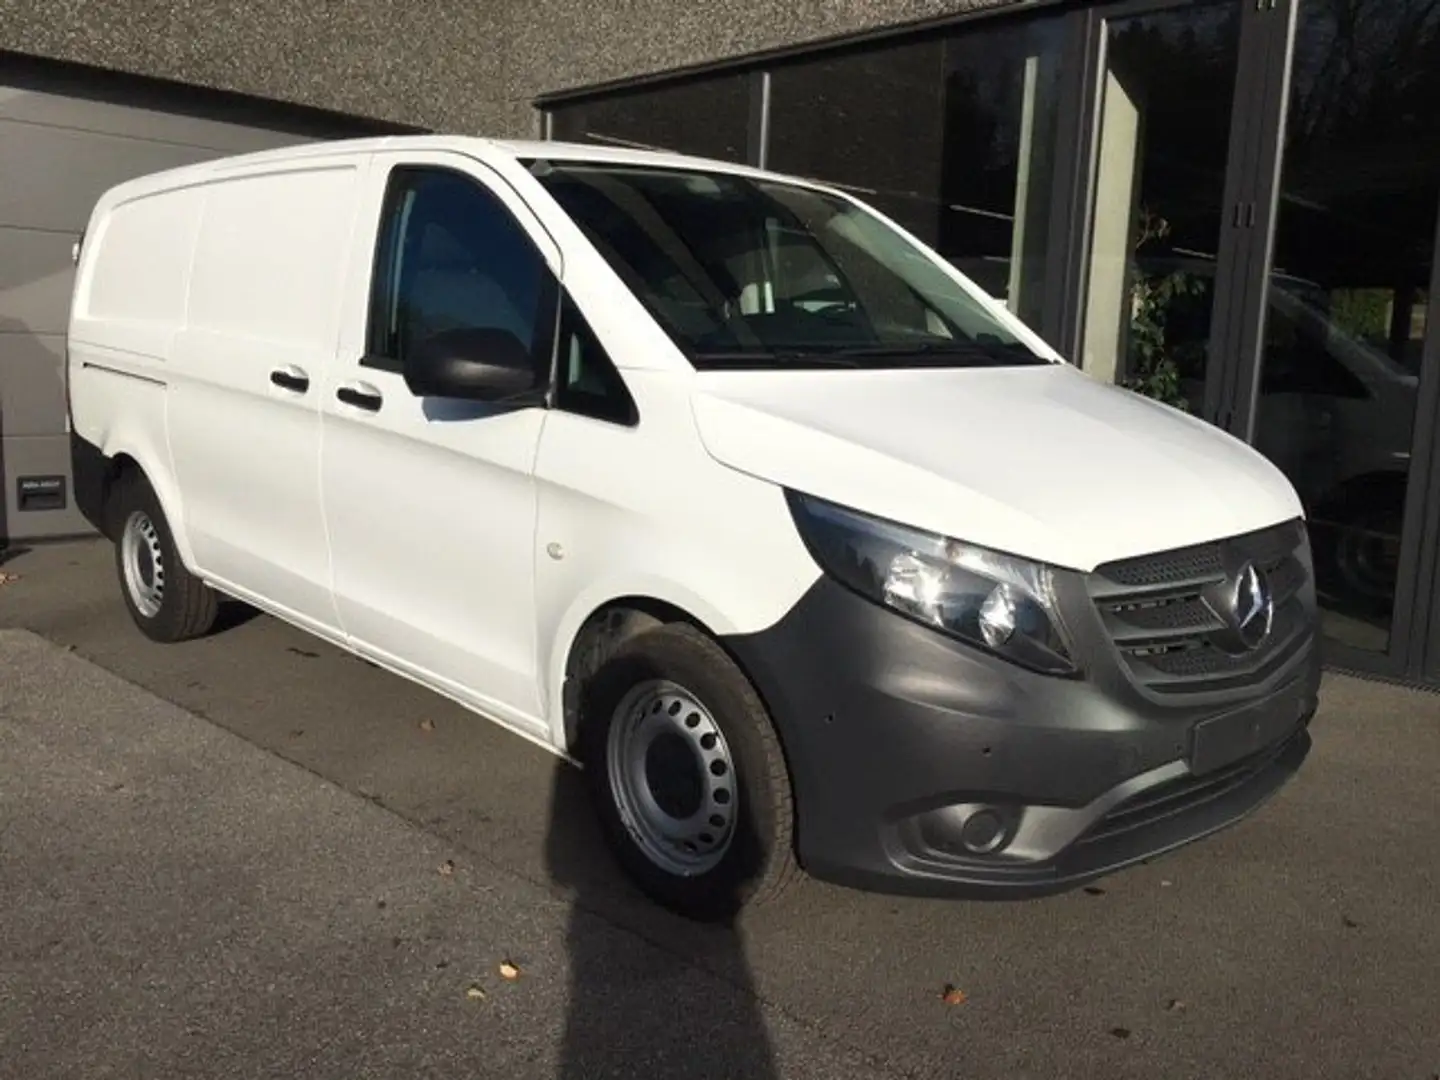 Mercedes-Benz Vito 110 CDI A2 - PTS - CAMERA - HOUTEN VLOER Wit - 2